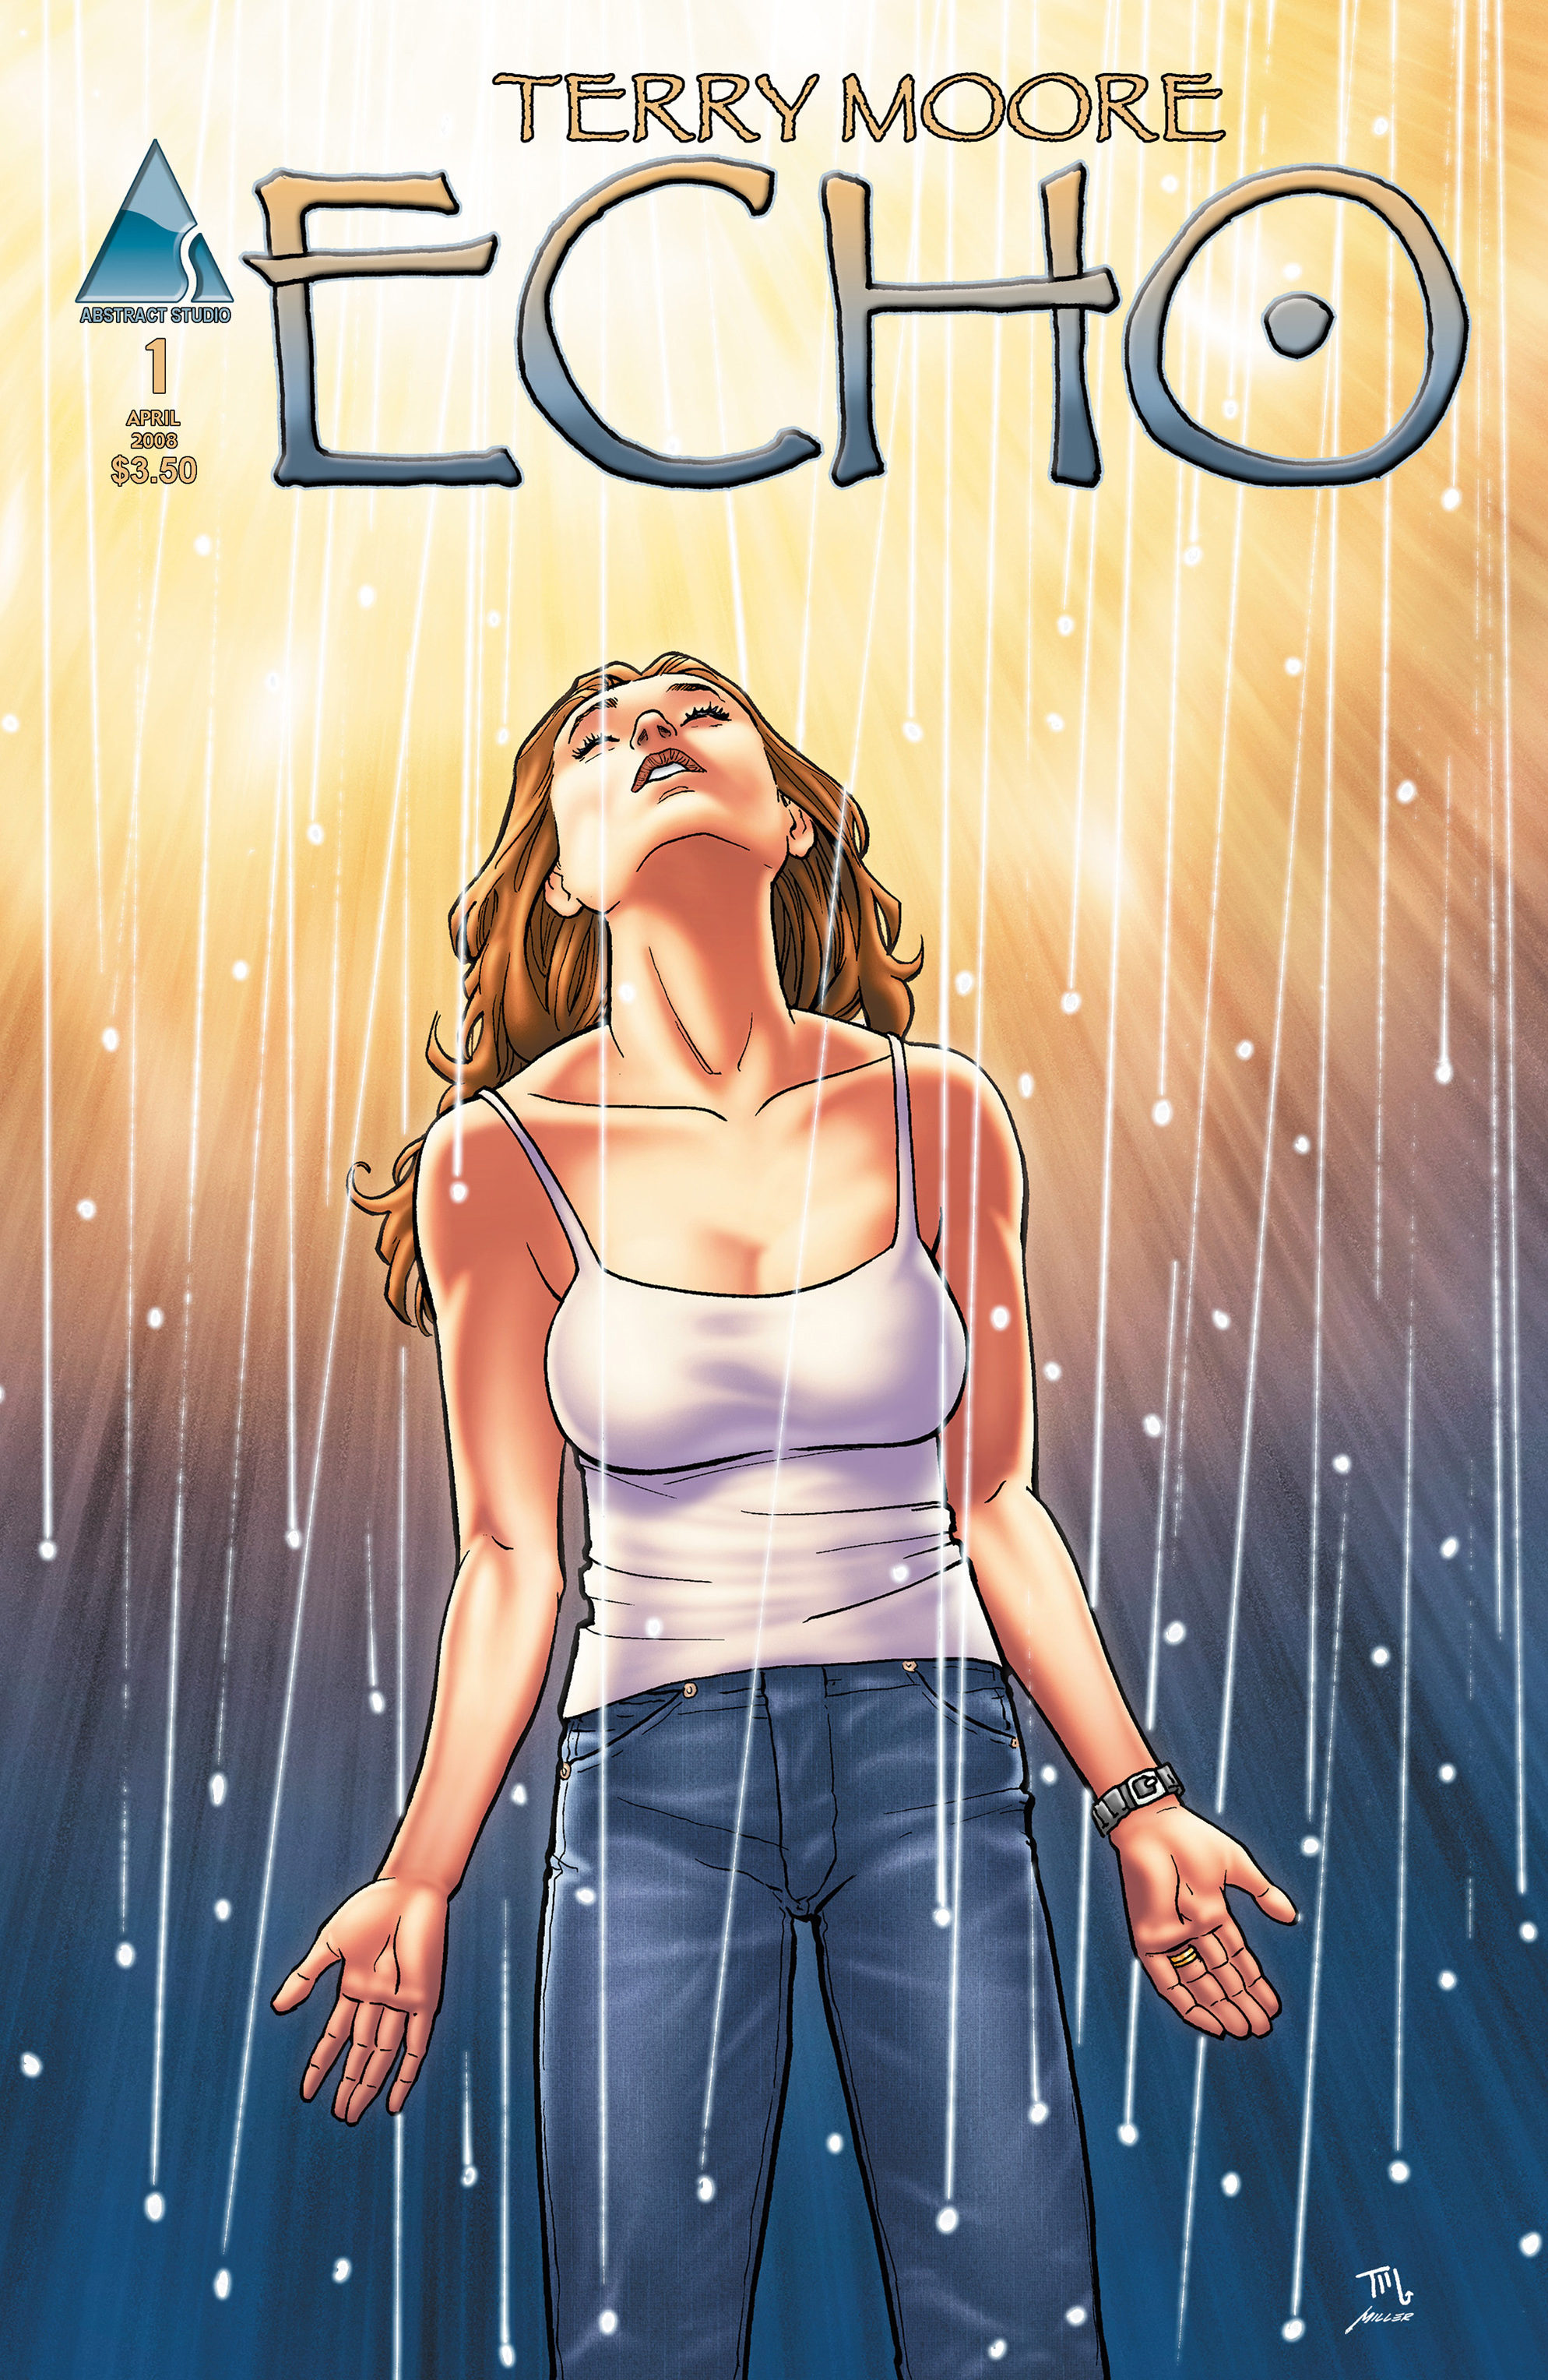 Read online Terry Moore's Echo comic -  Issue #1 - 1